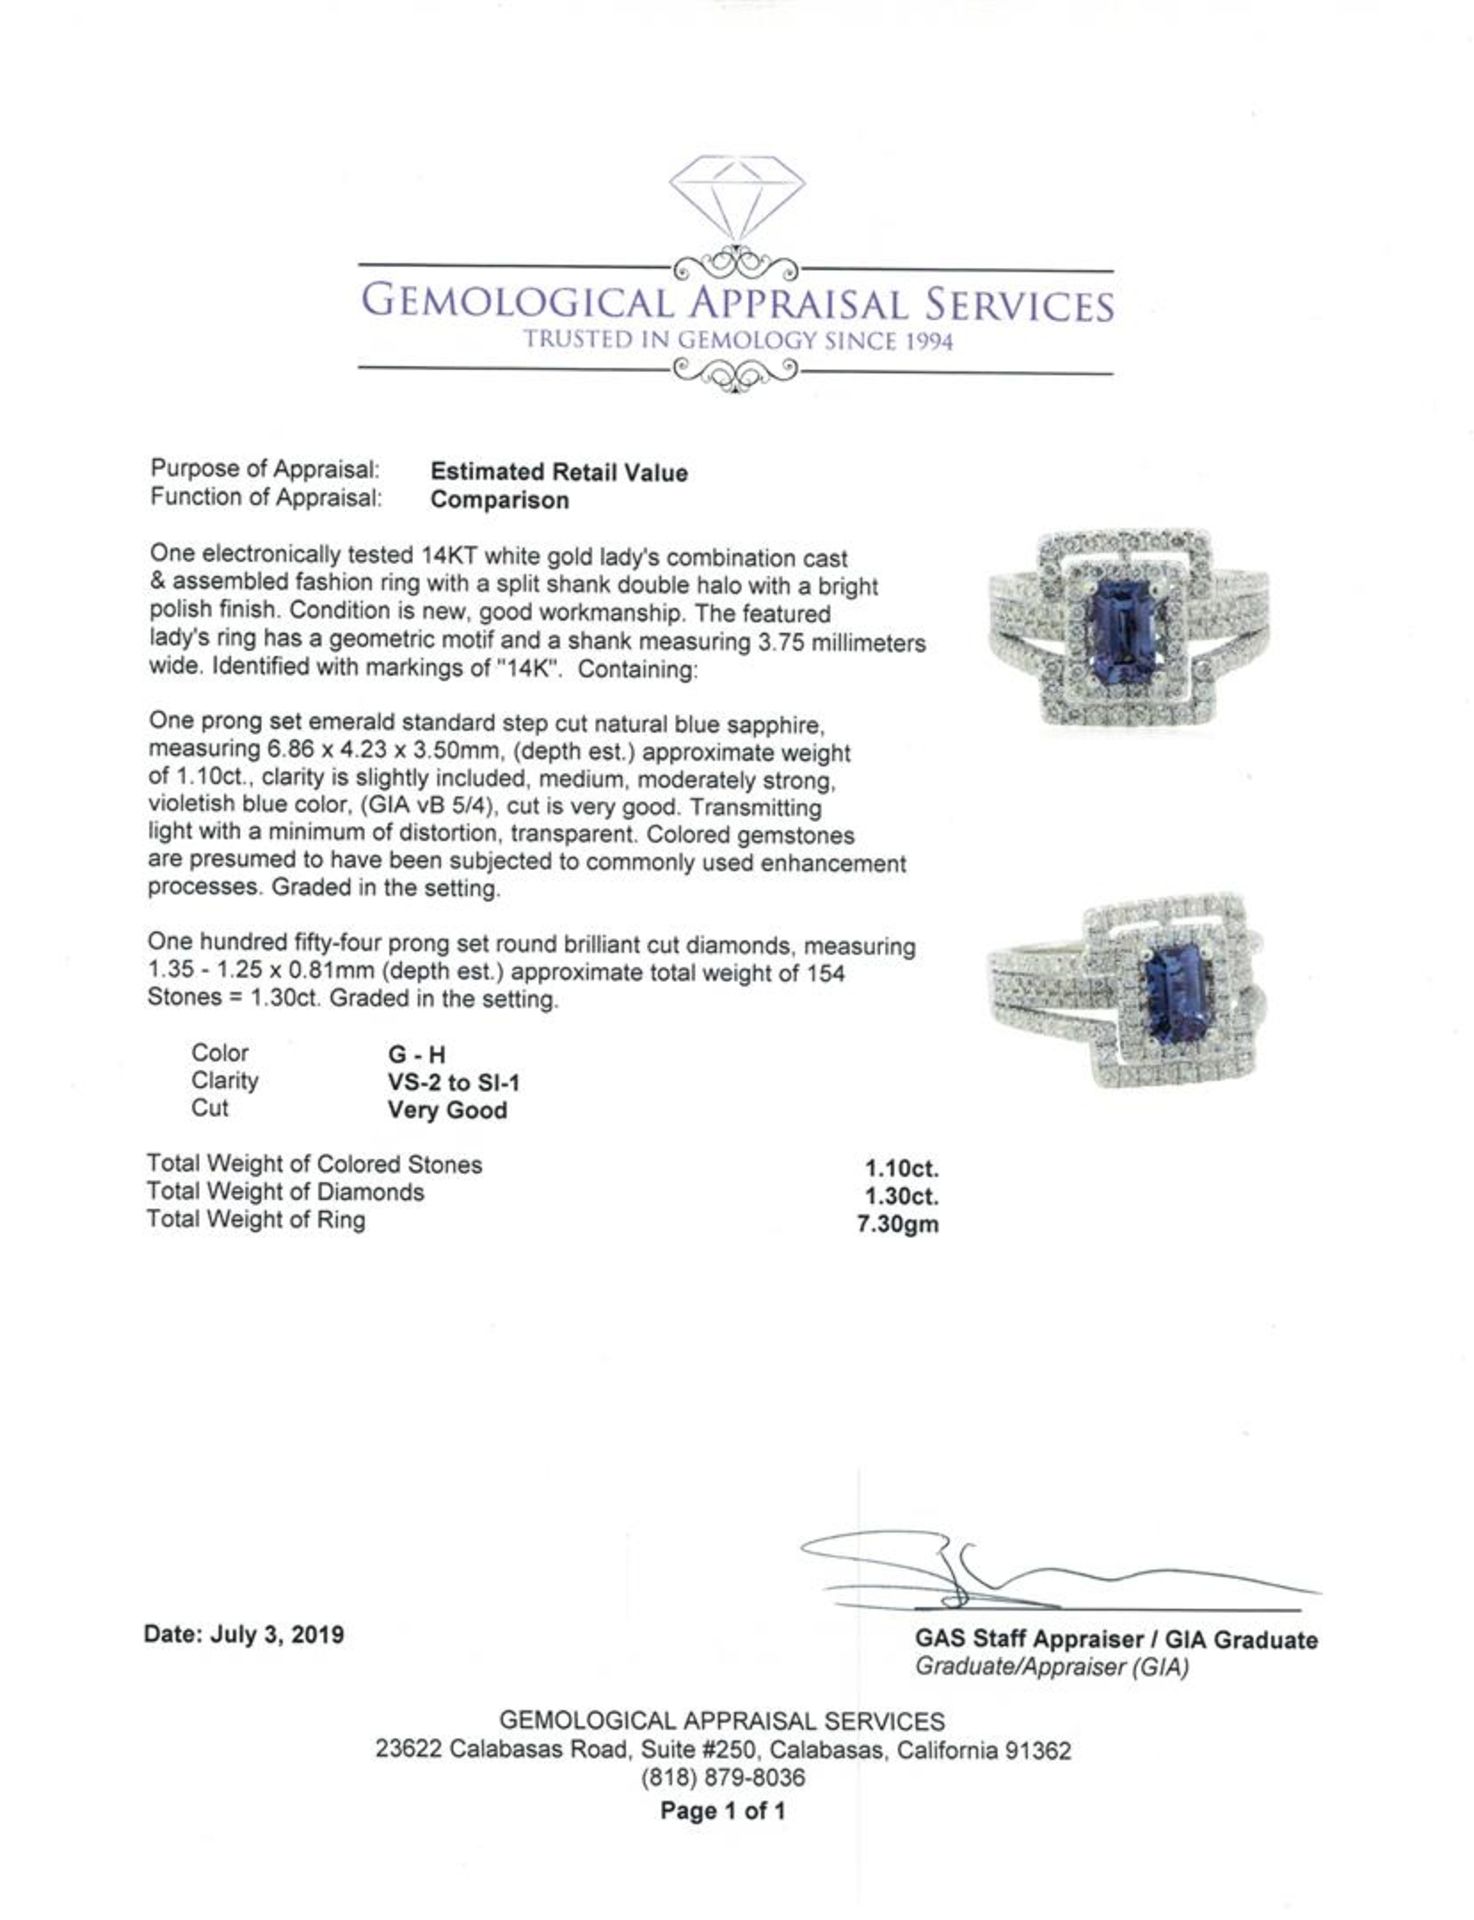 2.40 ctw Sapphire and Diamond Ring - 14KT White Gold - Image 5 of 5